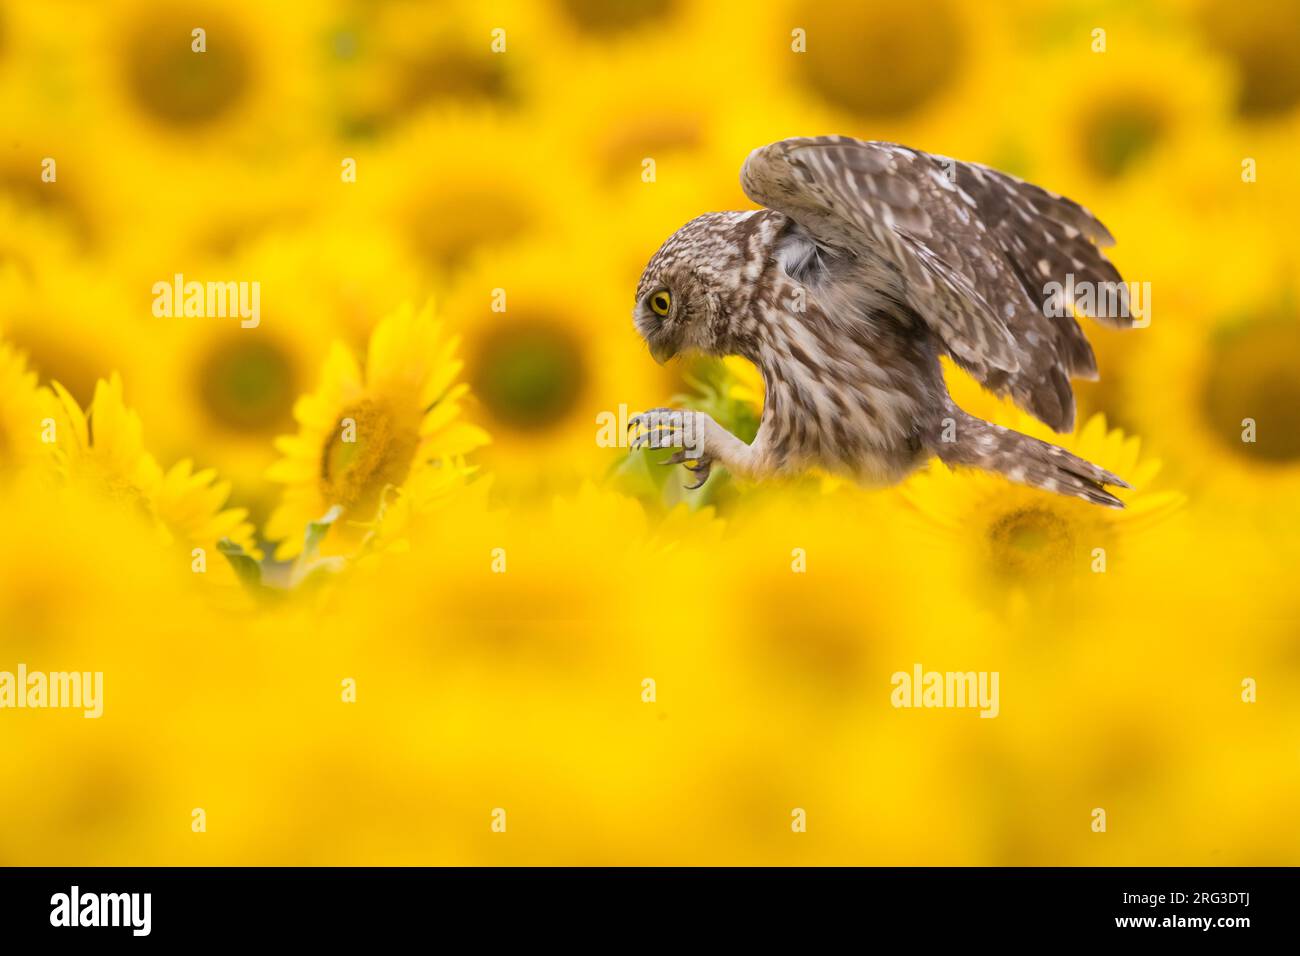 Little Owl (Athene noctua) in Italy. In a field of yellow sun flowers. Stock Photo